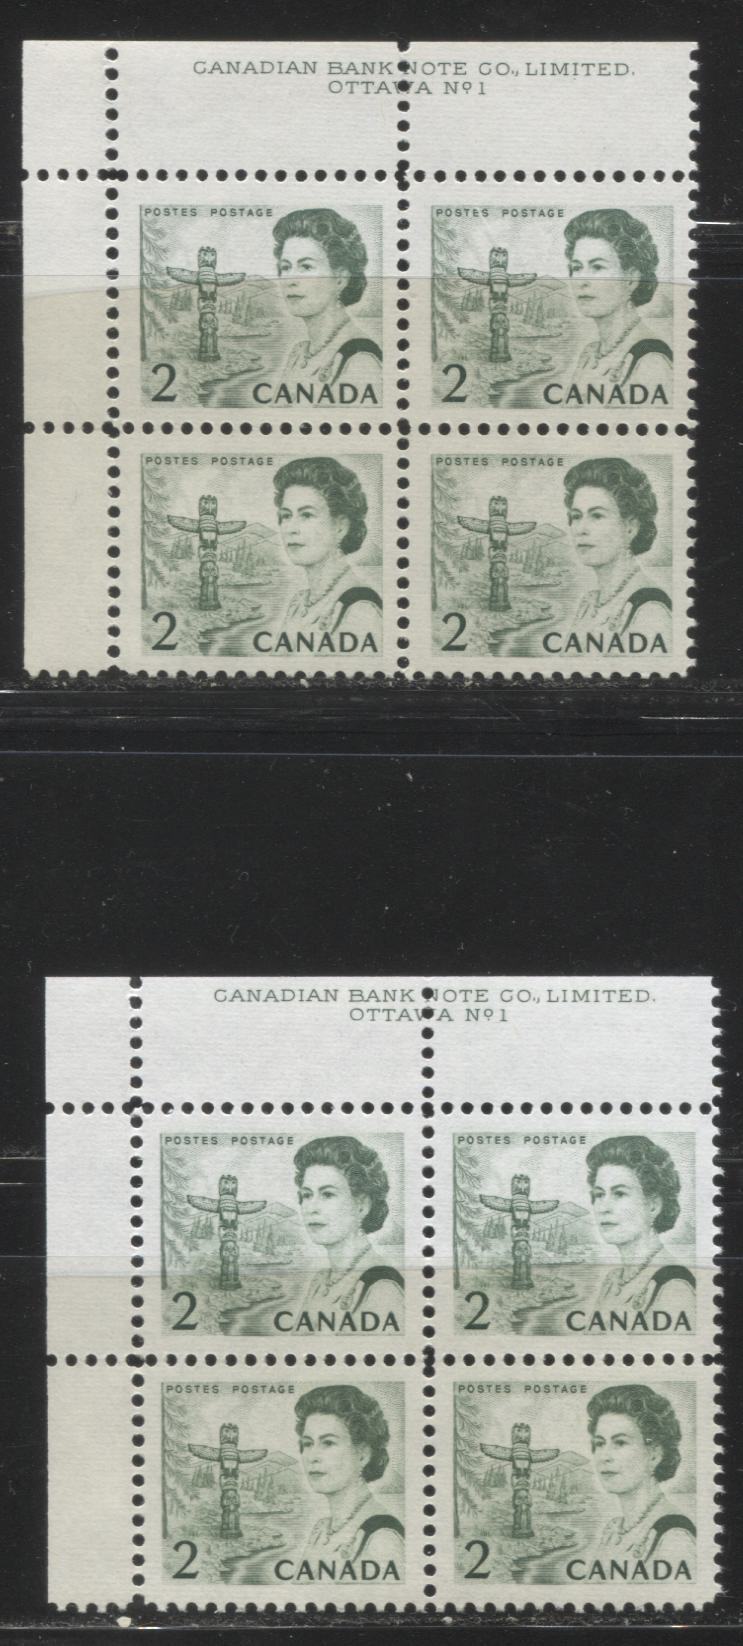 Lot #176 Canada #455iii 2c Bright Green, and Deep Bright Green Pacific Coast Totem Pole, 1967-1973 Centennial Issue, Two VFNH UL Plate 1 Blocks on Two Different LF Ribbed Papers, Eggshell PVA Gum